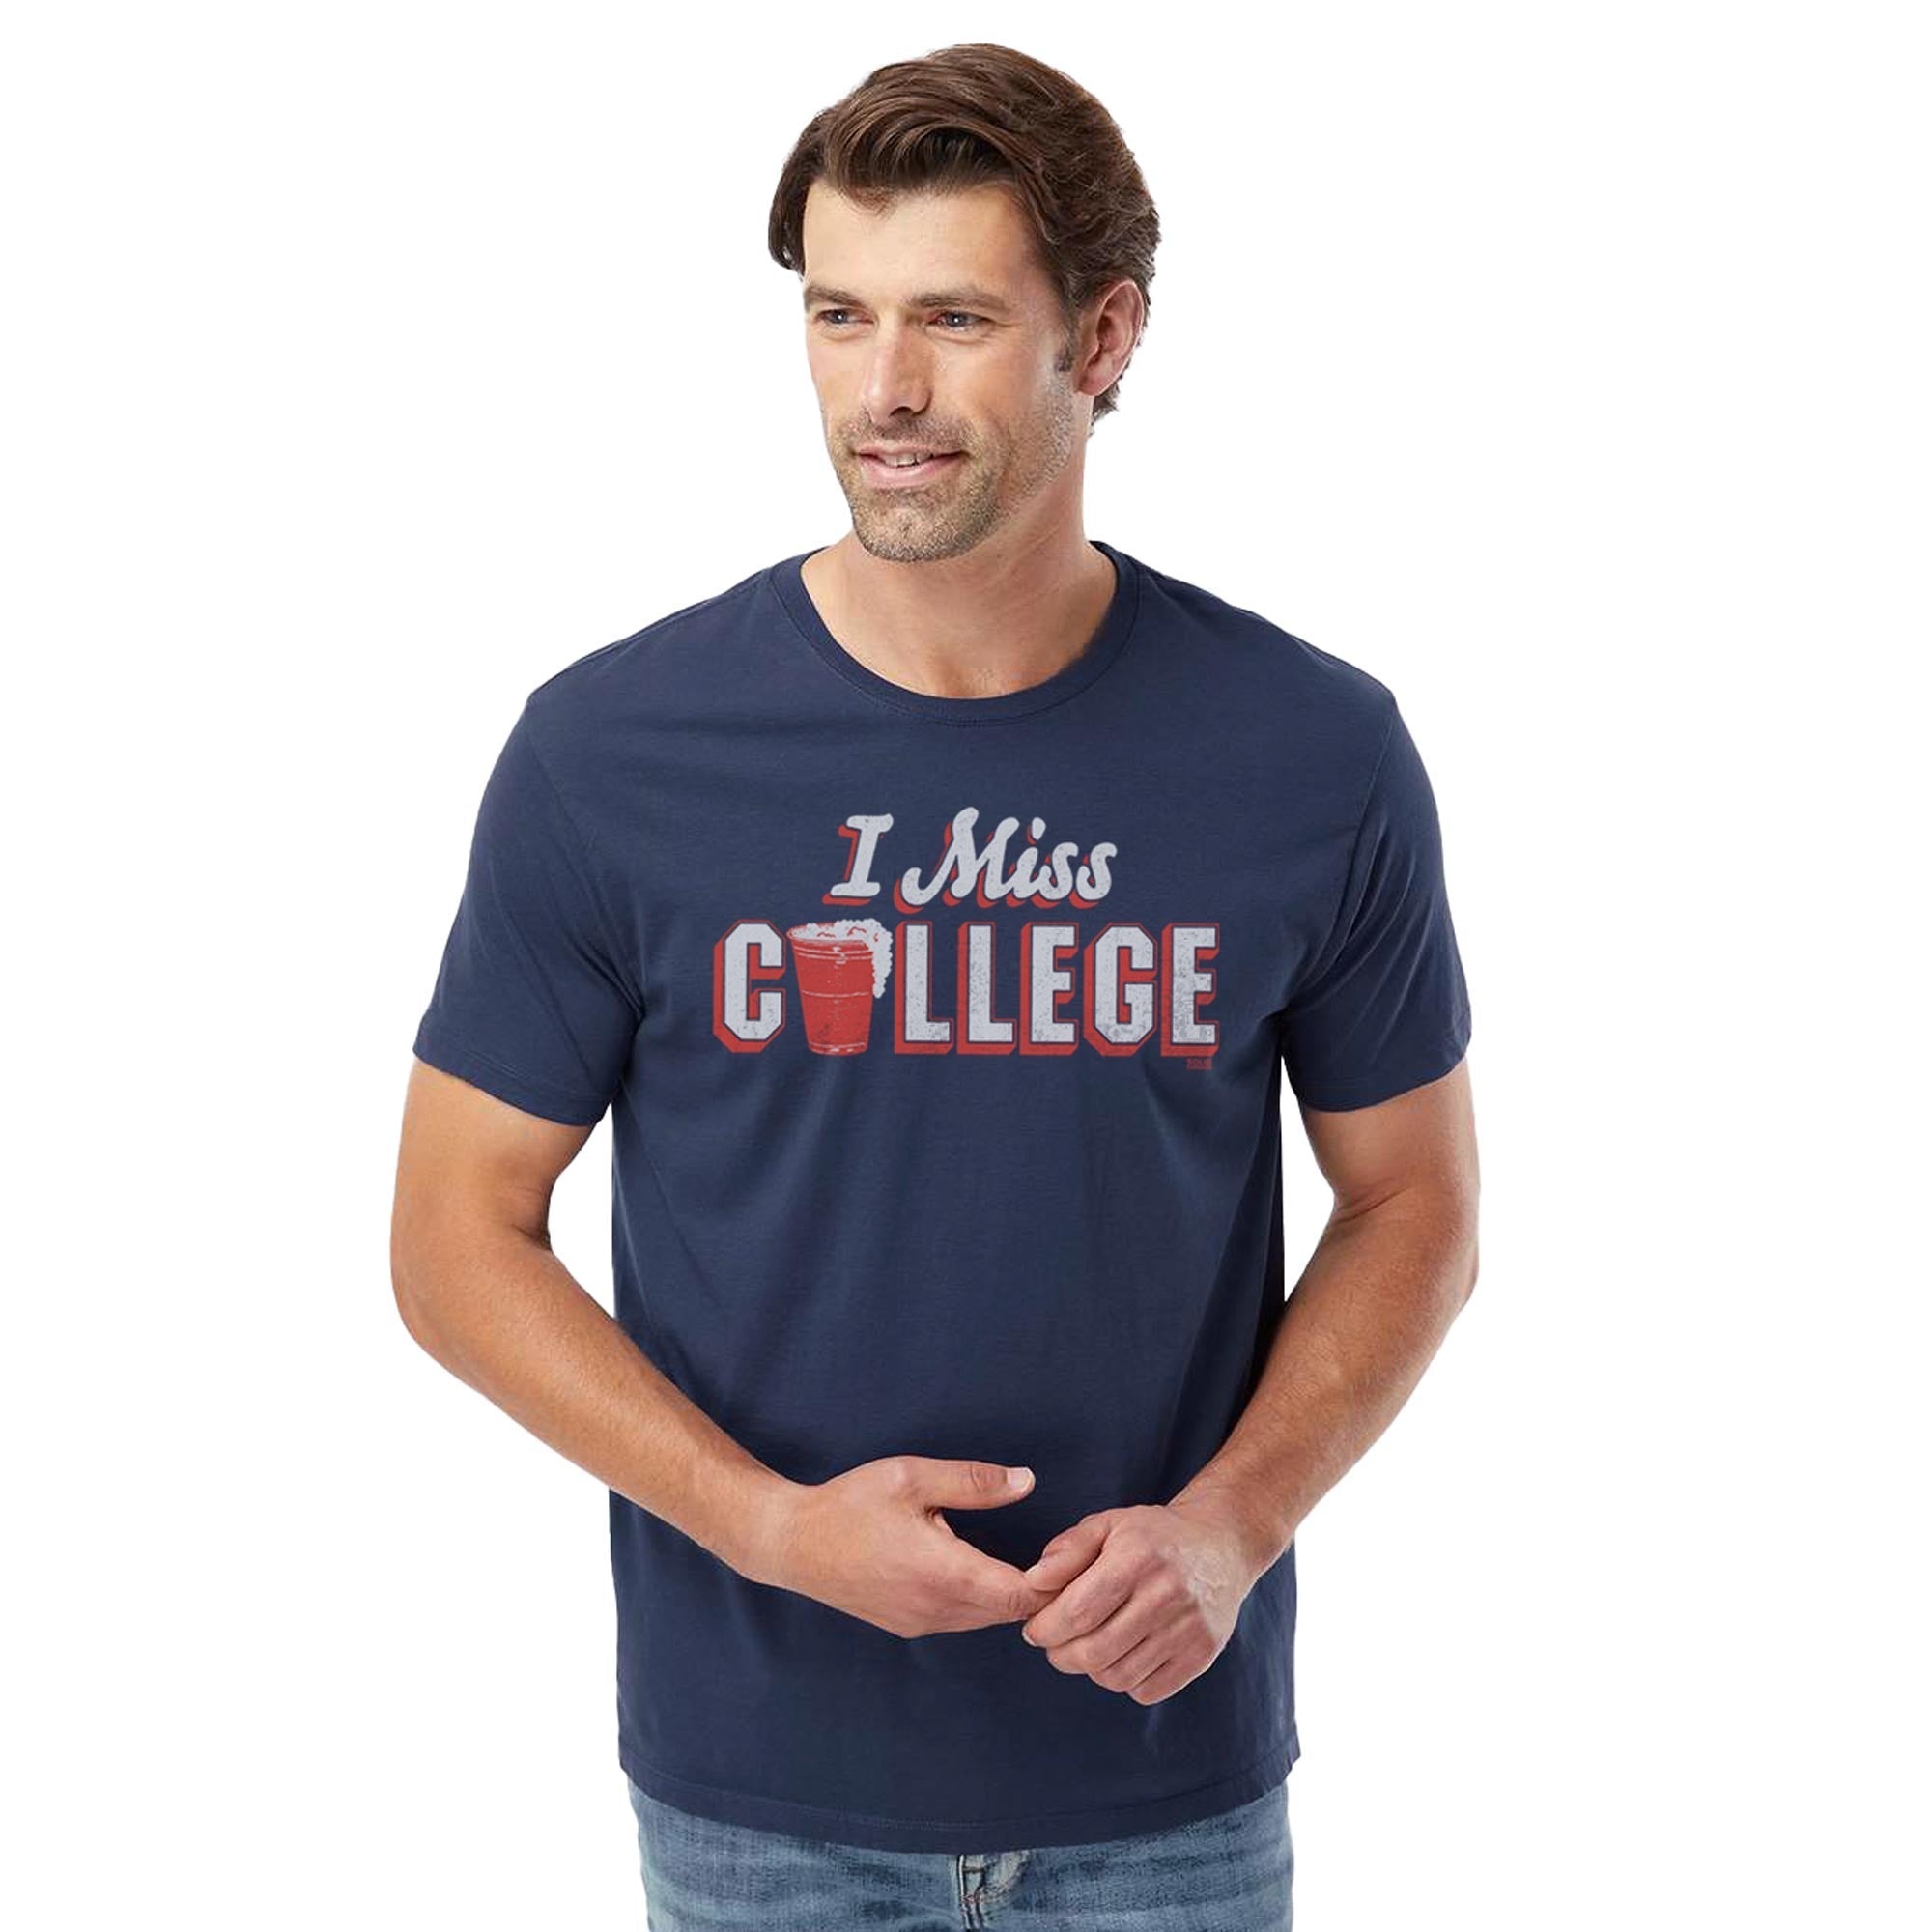 I Miss College Vintage Organic Cotton T-shirt | Funny Party Millennial   Tee On Model | Solid Threads